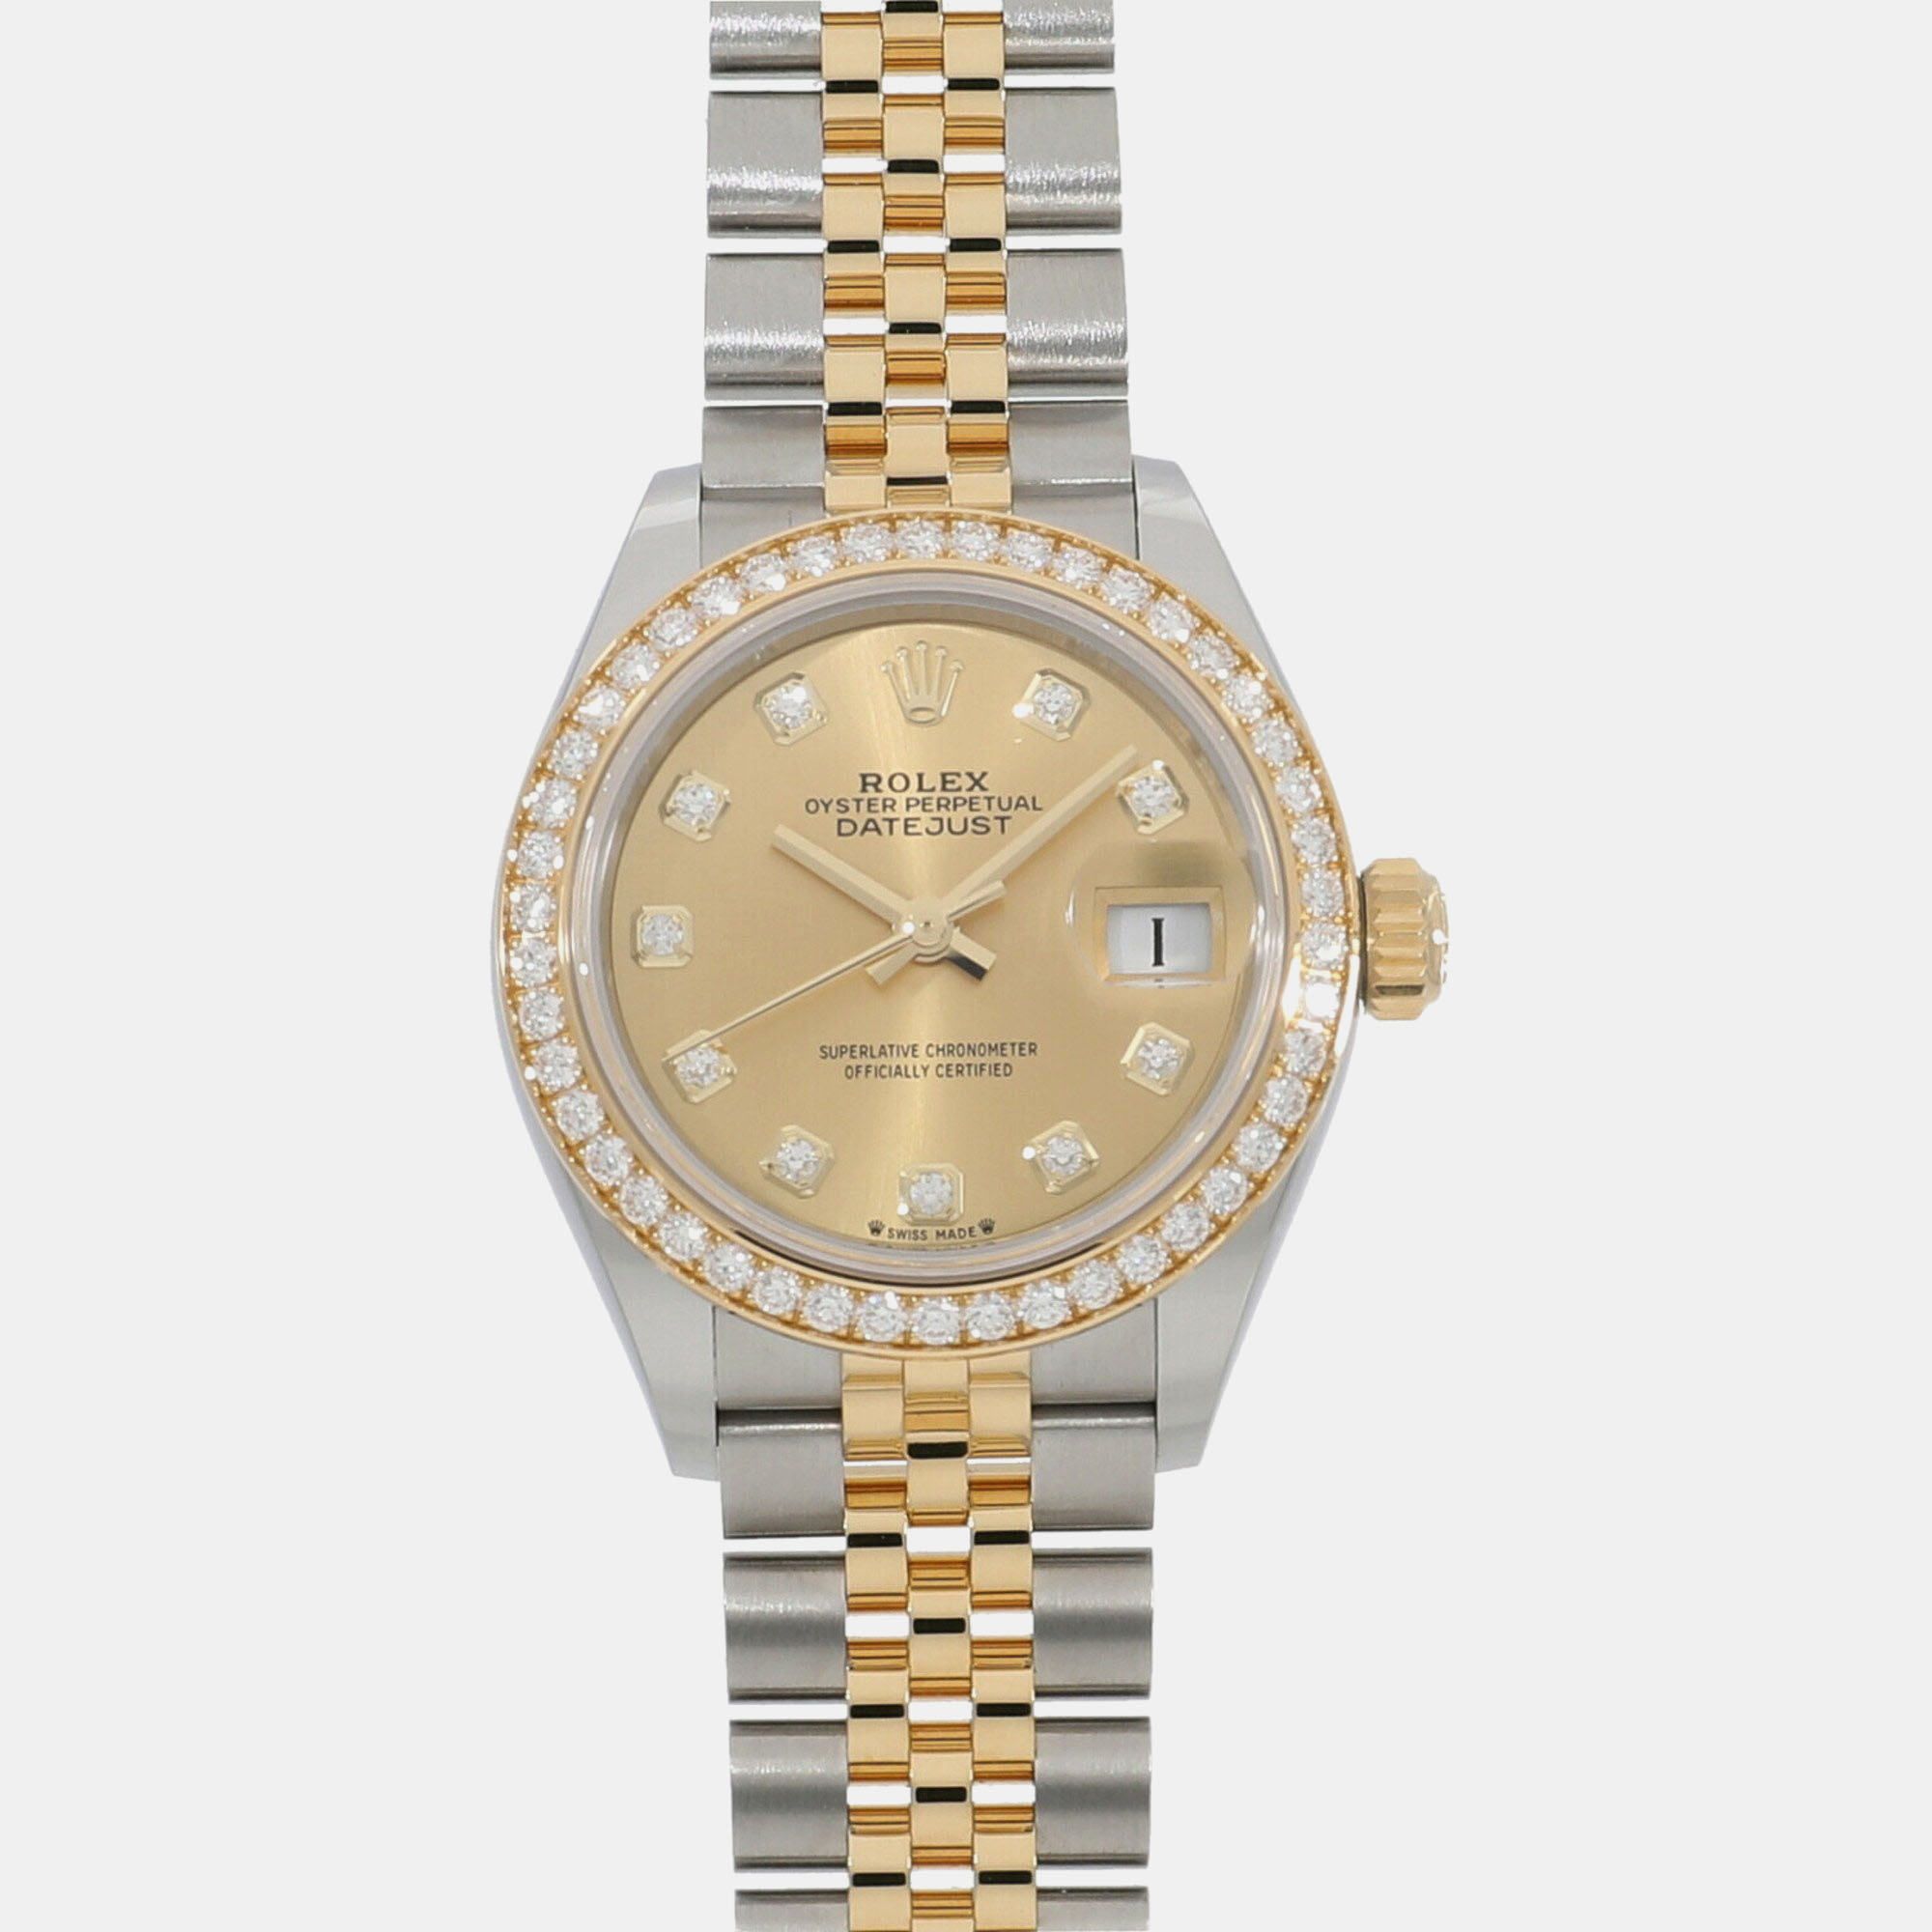 Rolex champagne 18k yellow gold stainless steel diamond datejust 279383rbr automatic women's wristwatch 28 mm